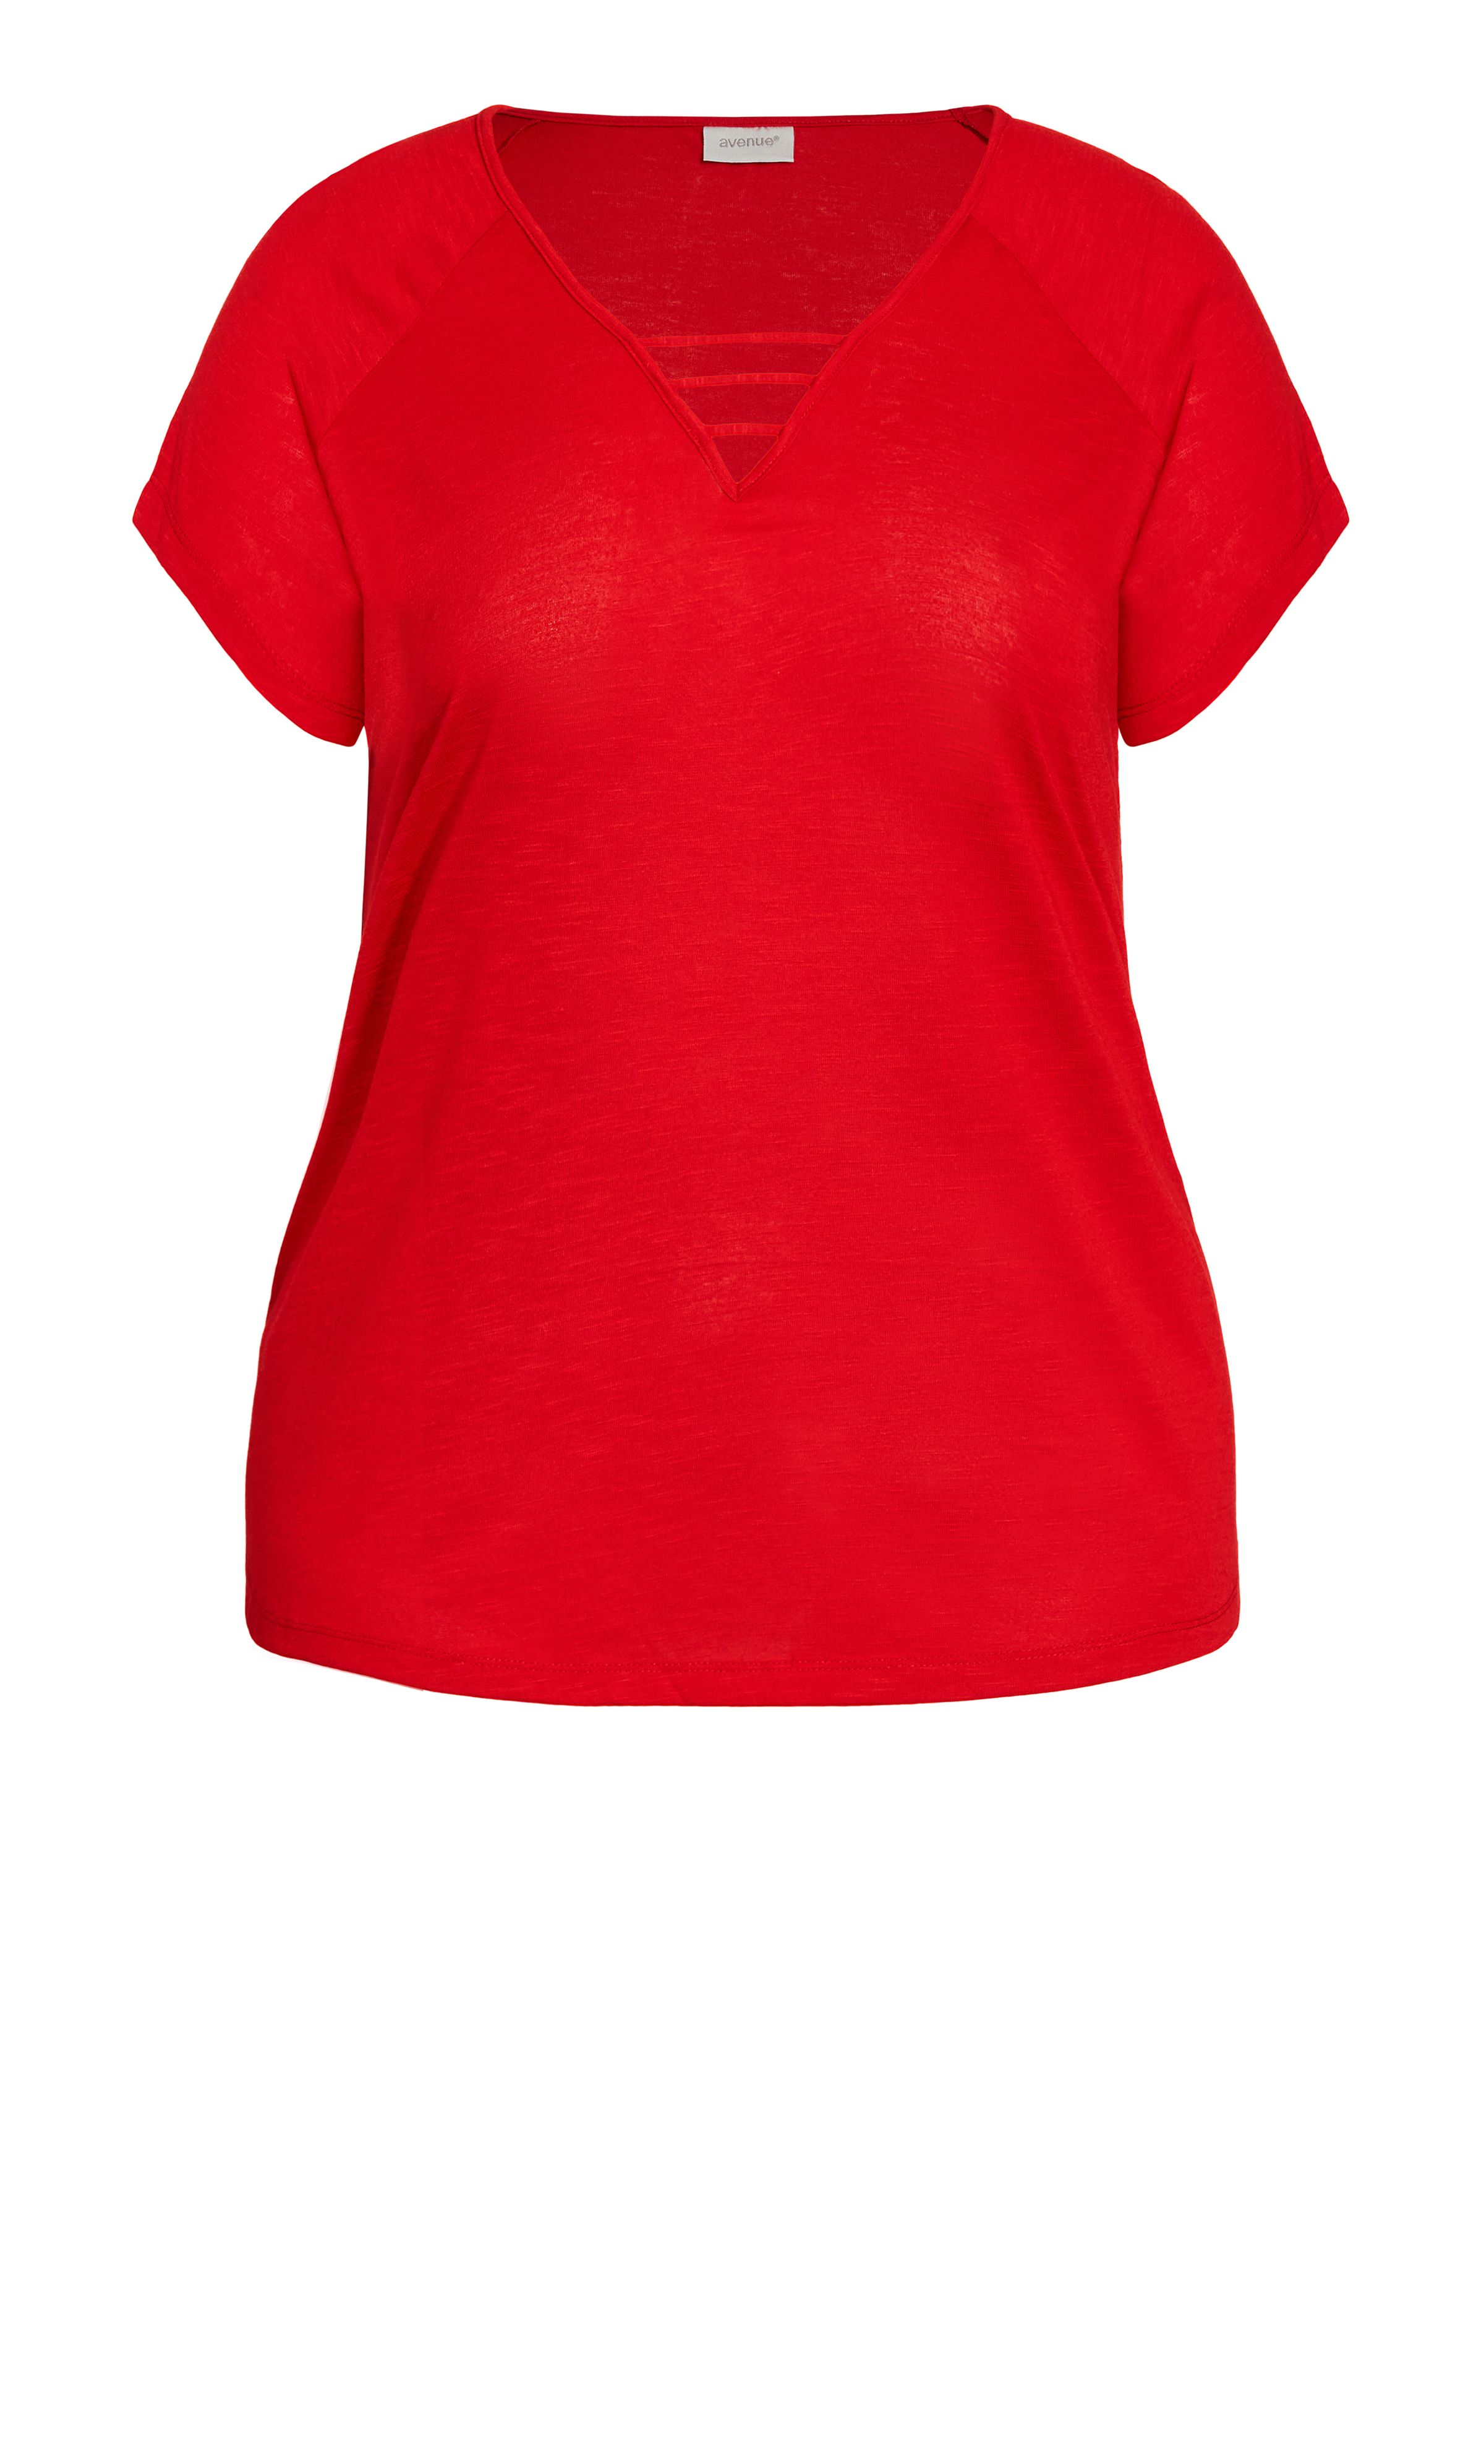 A bold take on a classic shape, the red 3 Bar V Neck Top is sure to make waves. The comfortable fabrication and easy everyday shape have an extra level of glamour from the feature neckline. Bright and exciting, you'll be glowing in this gorgeous top. Key Features Include: - V-neckline with strap detailing - Short sleeves - Pull-over fit - Stretch fabrication - Relaxed silhouette - Straight hemline at hips A pair of cuffed denim shorts are the perfect match for this top.